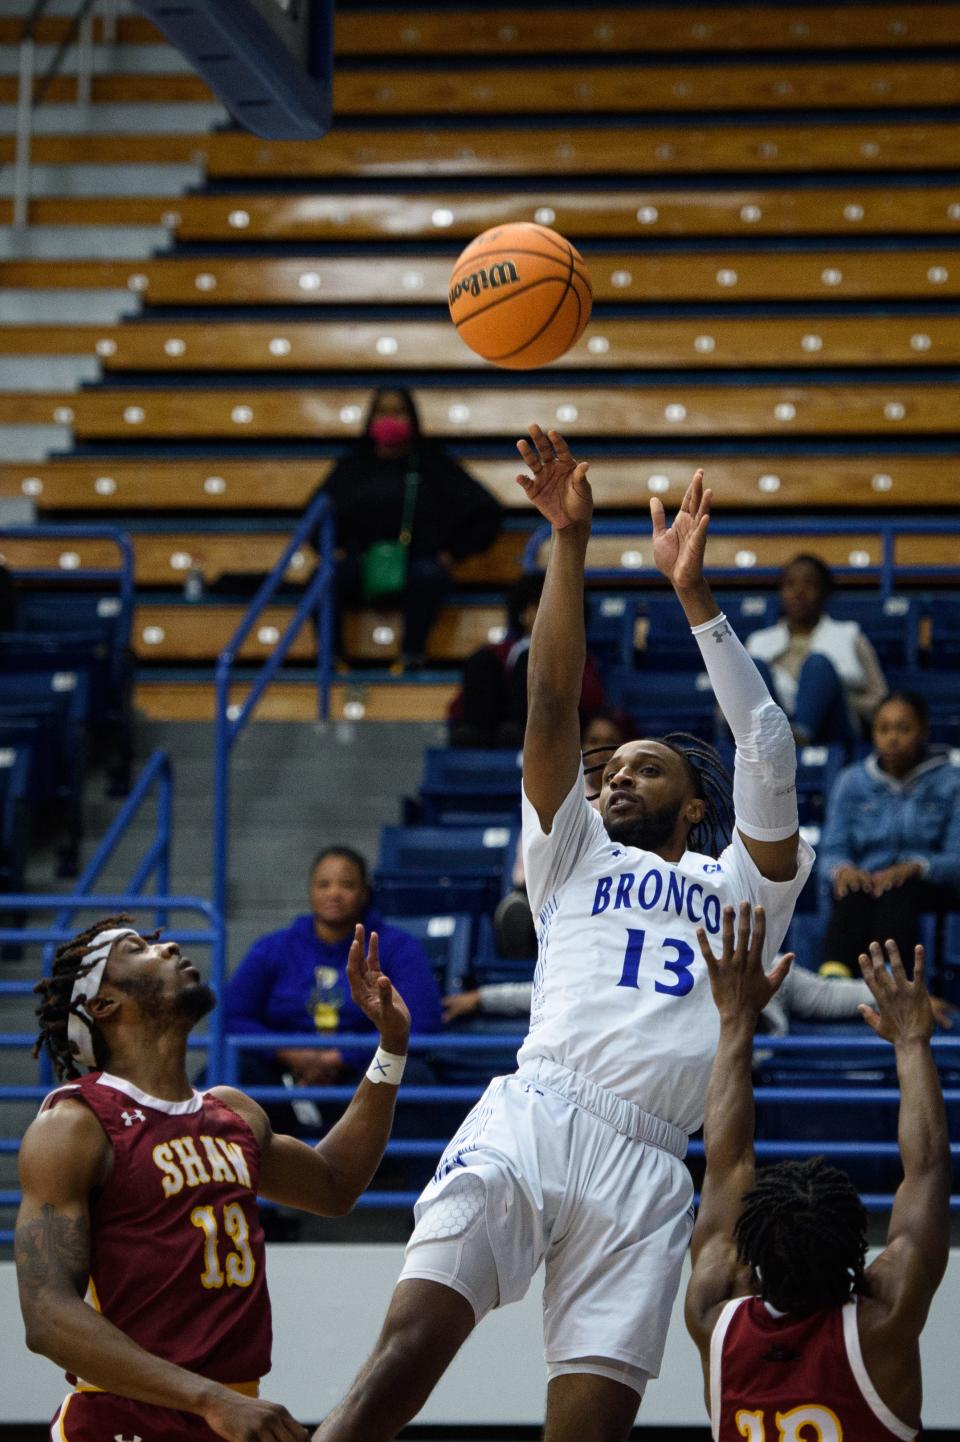 Tyler Foster shoots a 3-pointer during Shaw at Fayetteville State men’s basketball on Wednesday, Dec. 14, 2022.